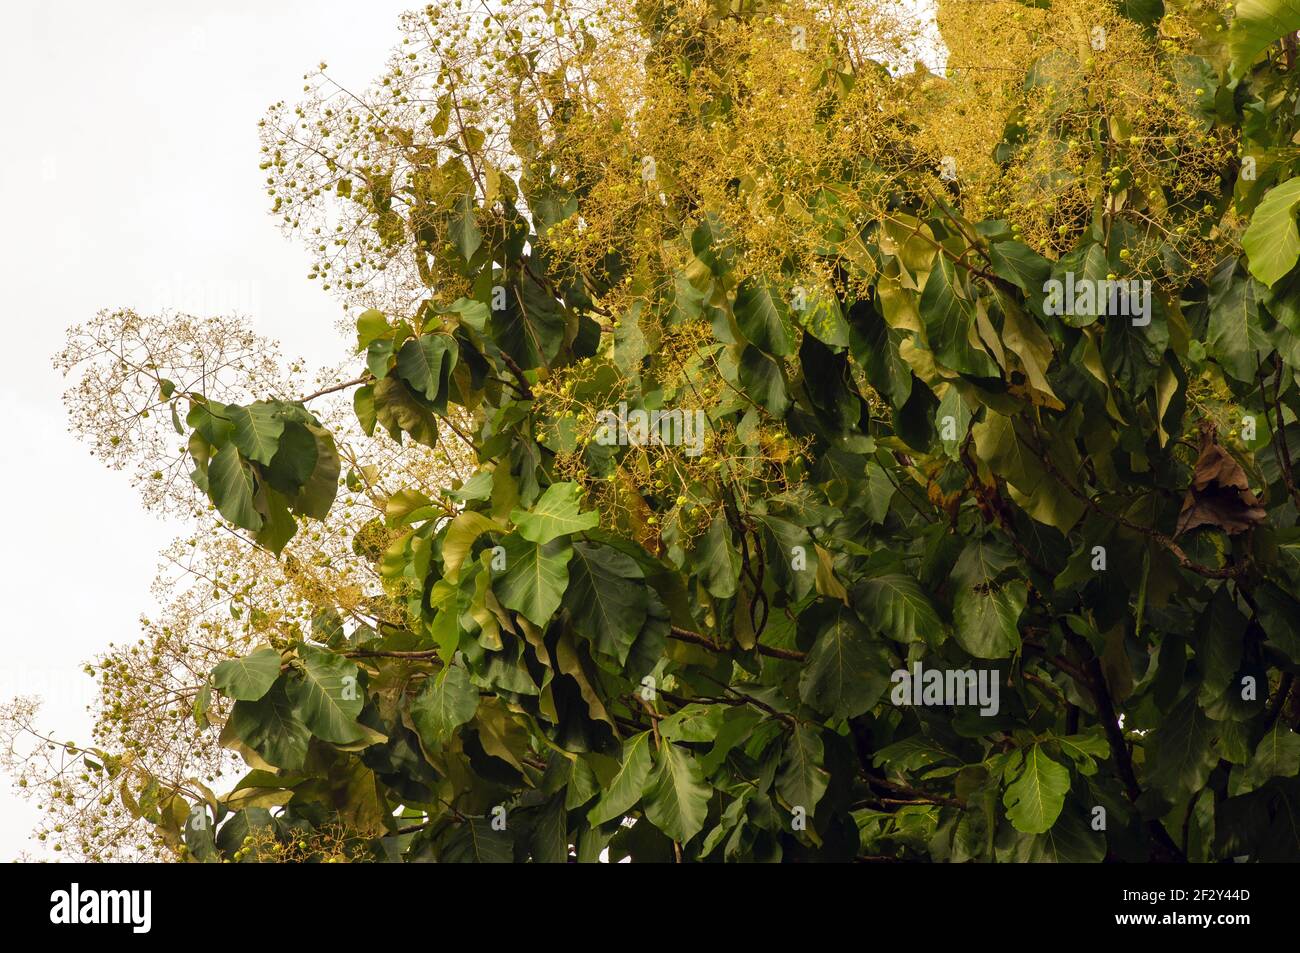 The fragrant teak flowers (Tectona grandis) blooming, arranged in dense clusters at the end of the branches, with cloudy sky background in Yogyakarta, Stock Photo